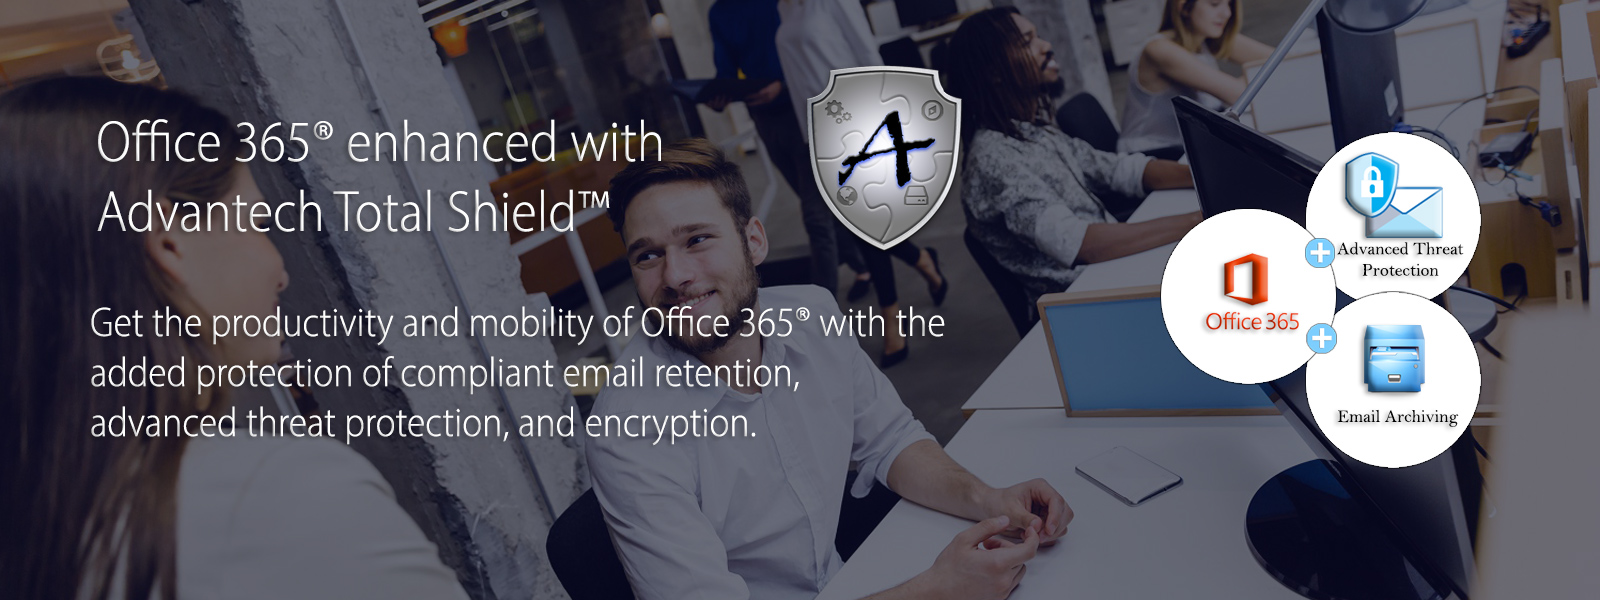 Office 365 Enhanced with Advantech Total Shield